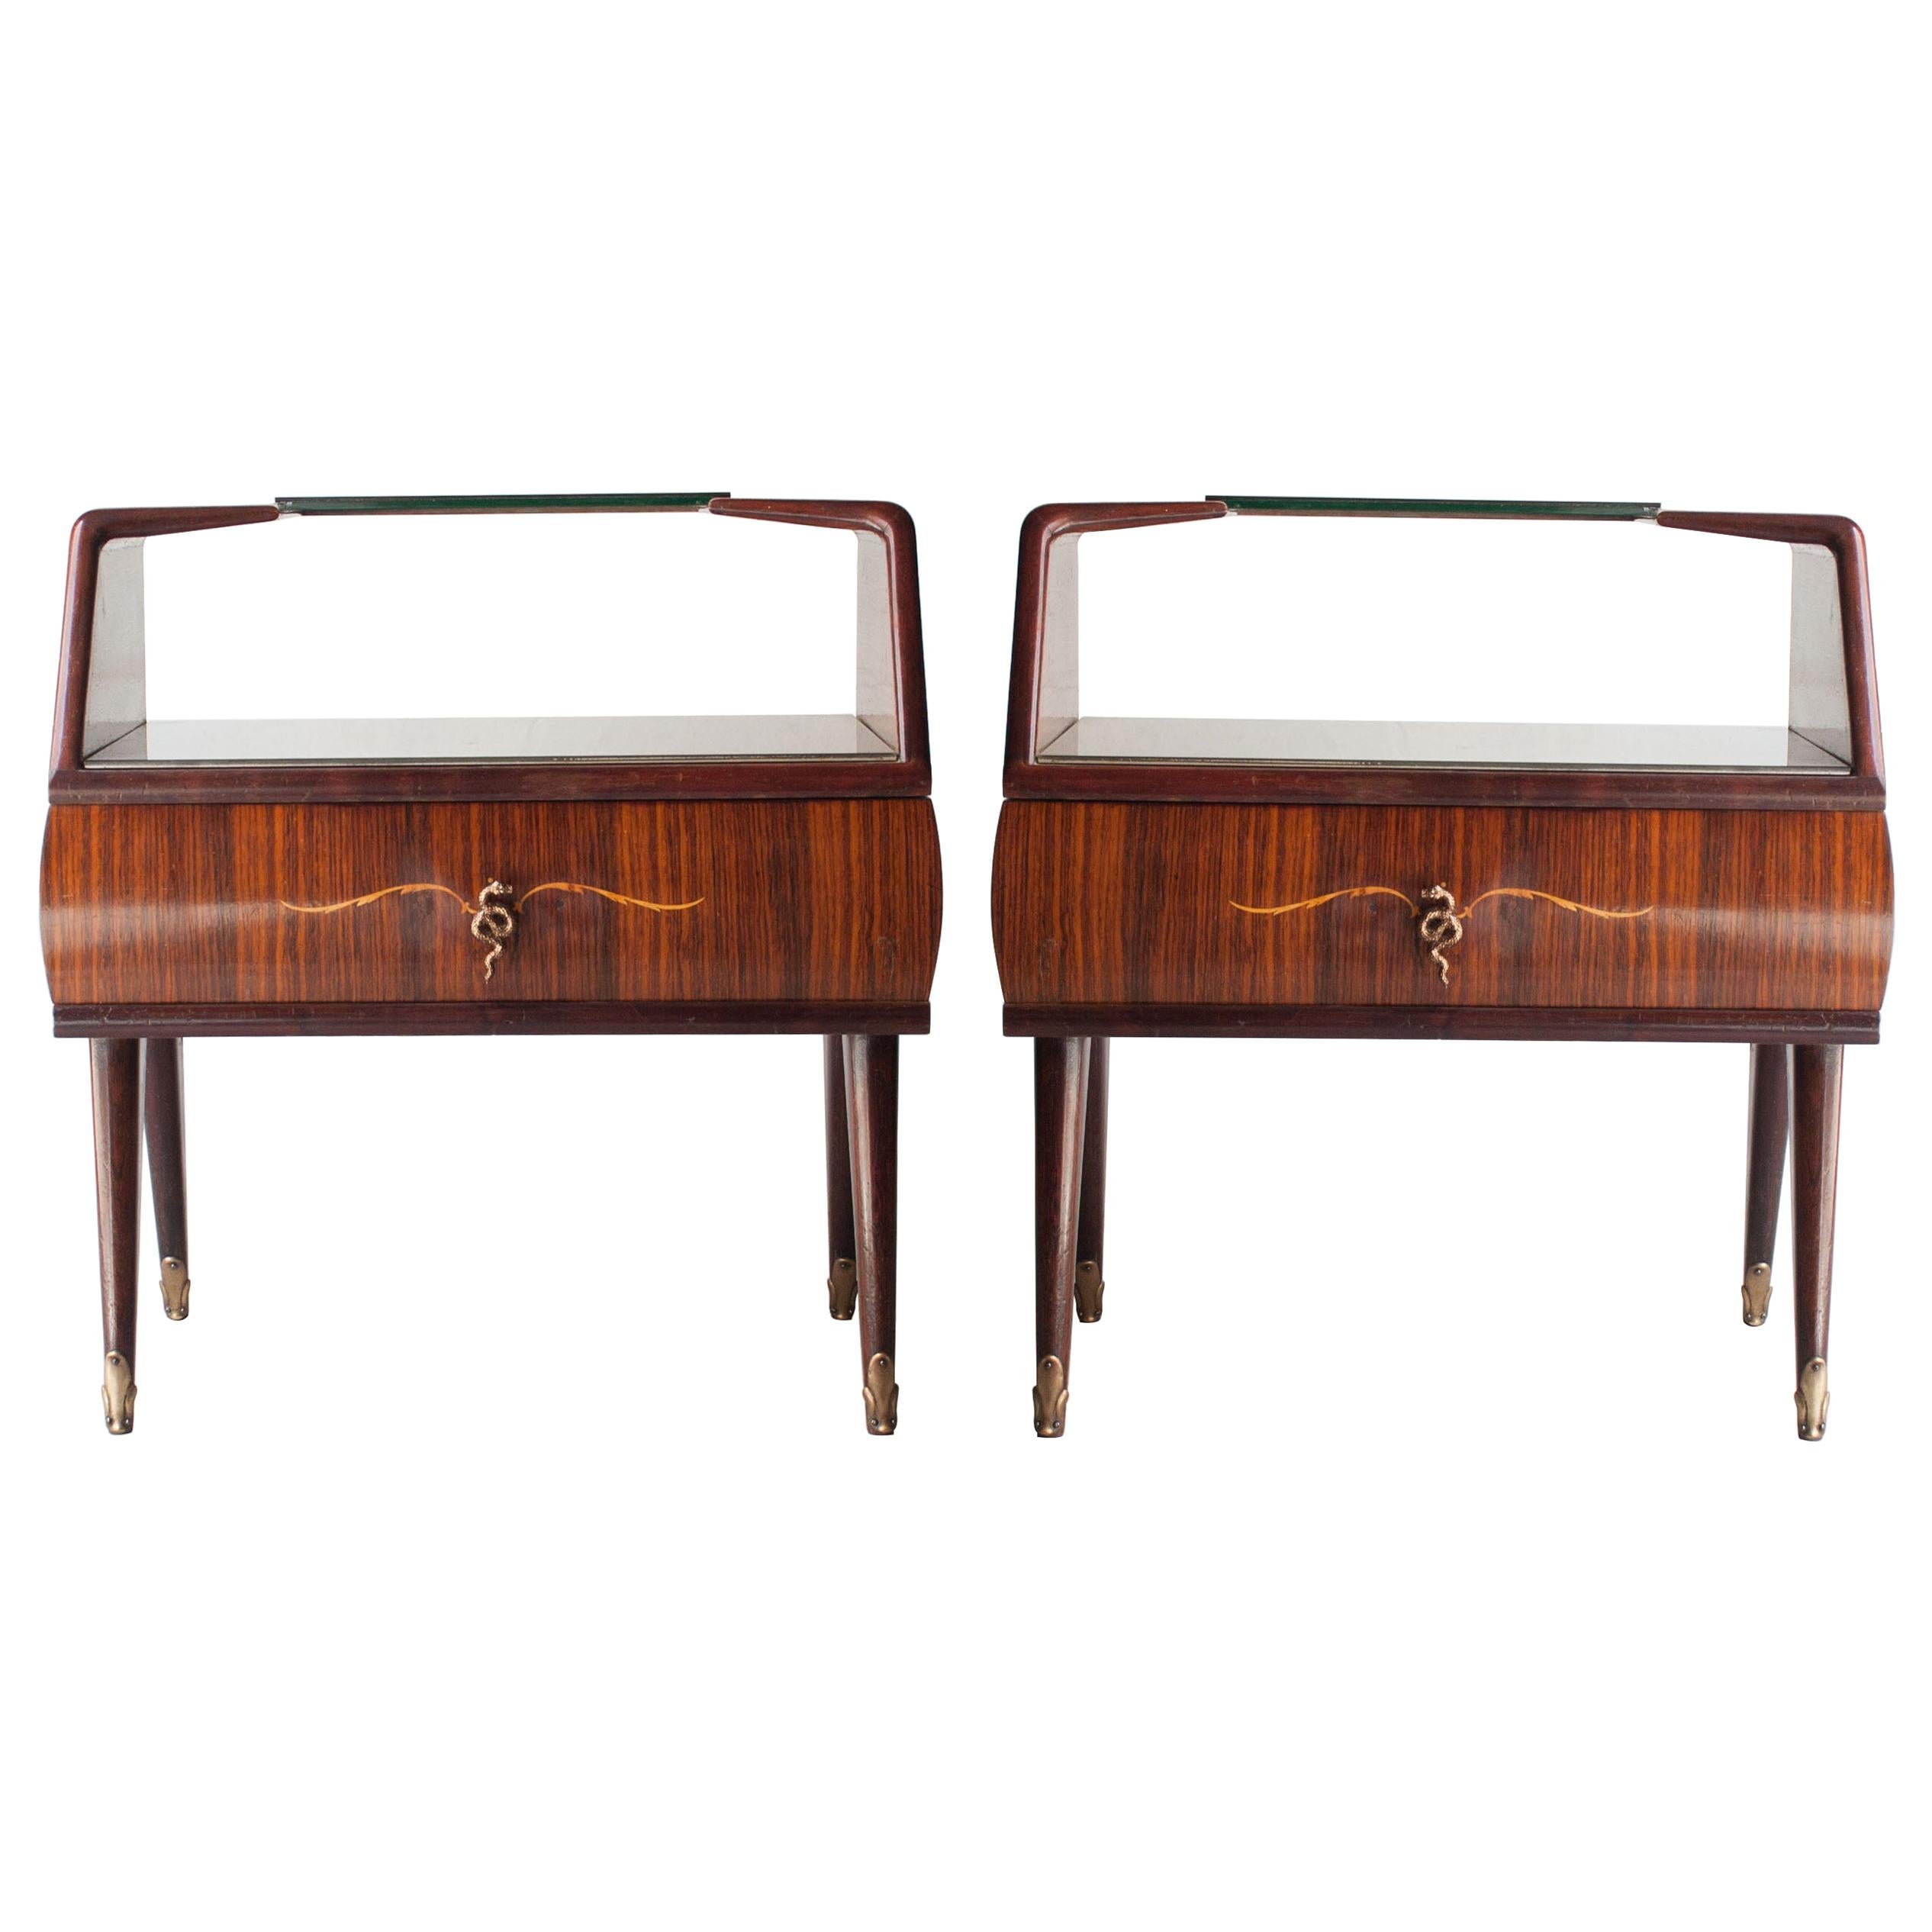 Midcentury Brown Opaline Glass Italian Pair of Bedside Tables, 1950